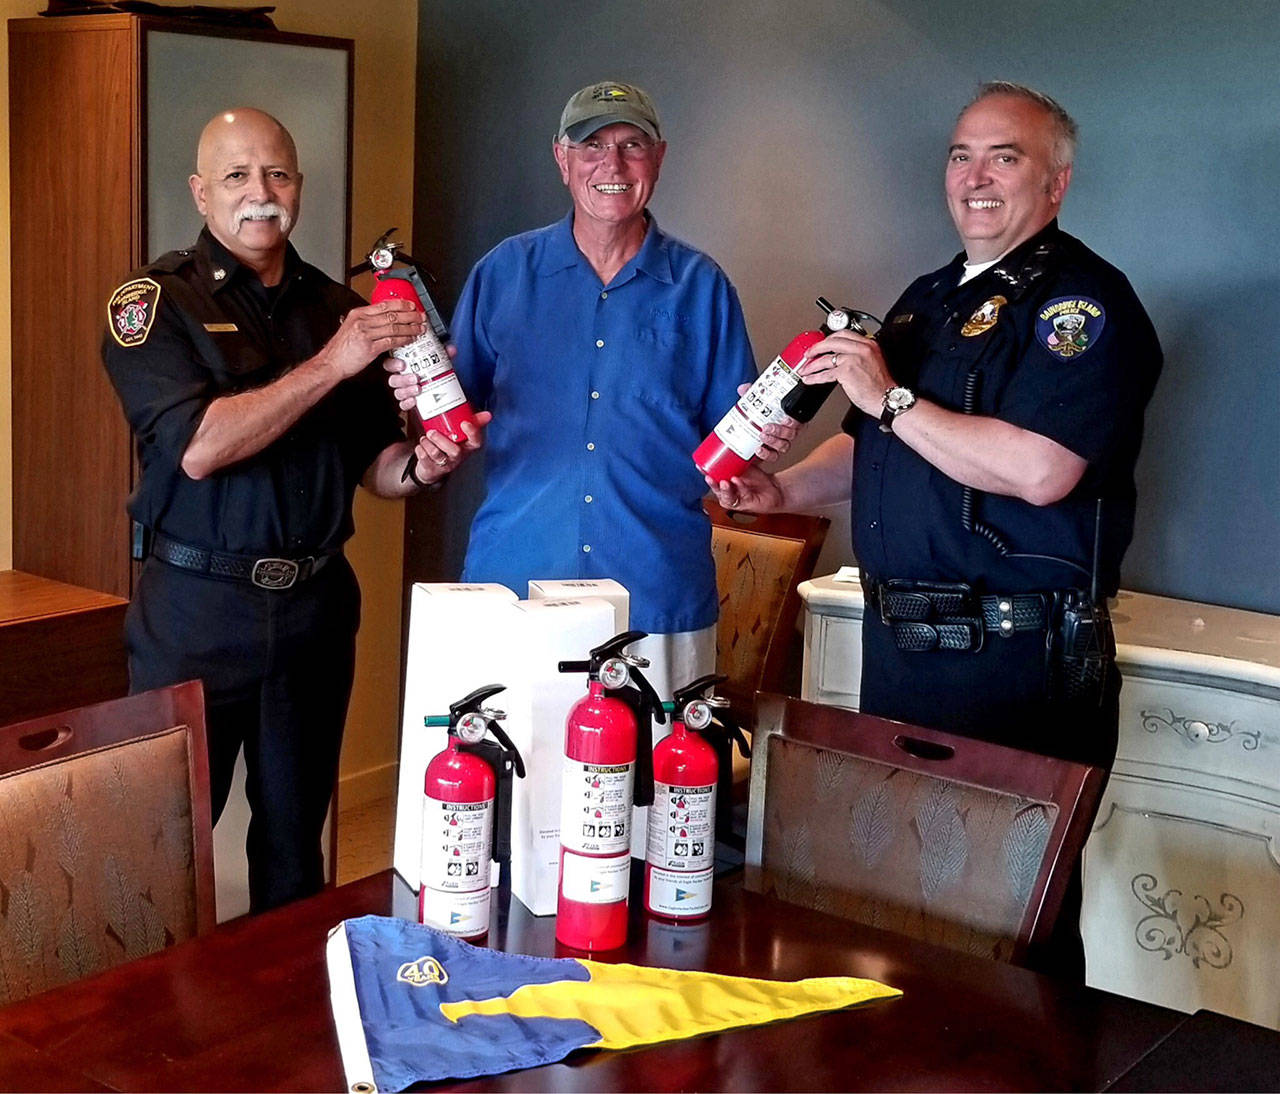 Eagle Harbor Yacht Club Vice Commodore Terry Kerby (center) presents fire extinguishers to Fire Chief Hank Teran and Police Chief Matt Hamner. (Photo courtesy of the Eagle Harbor Yacht Club)